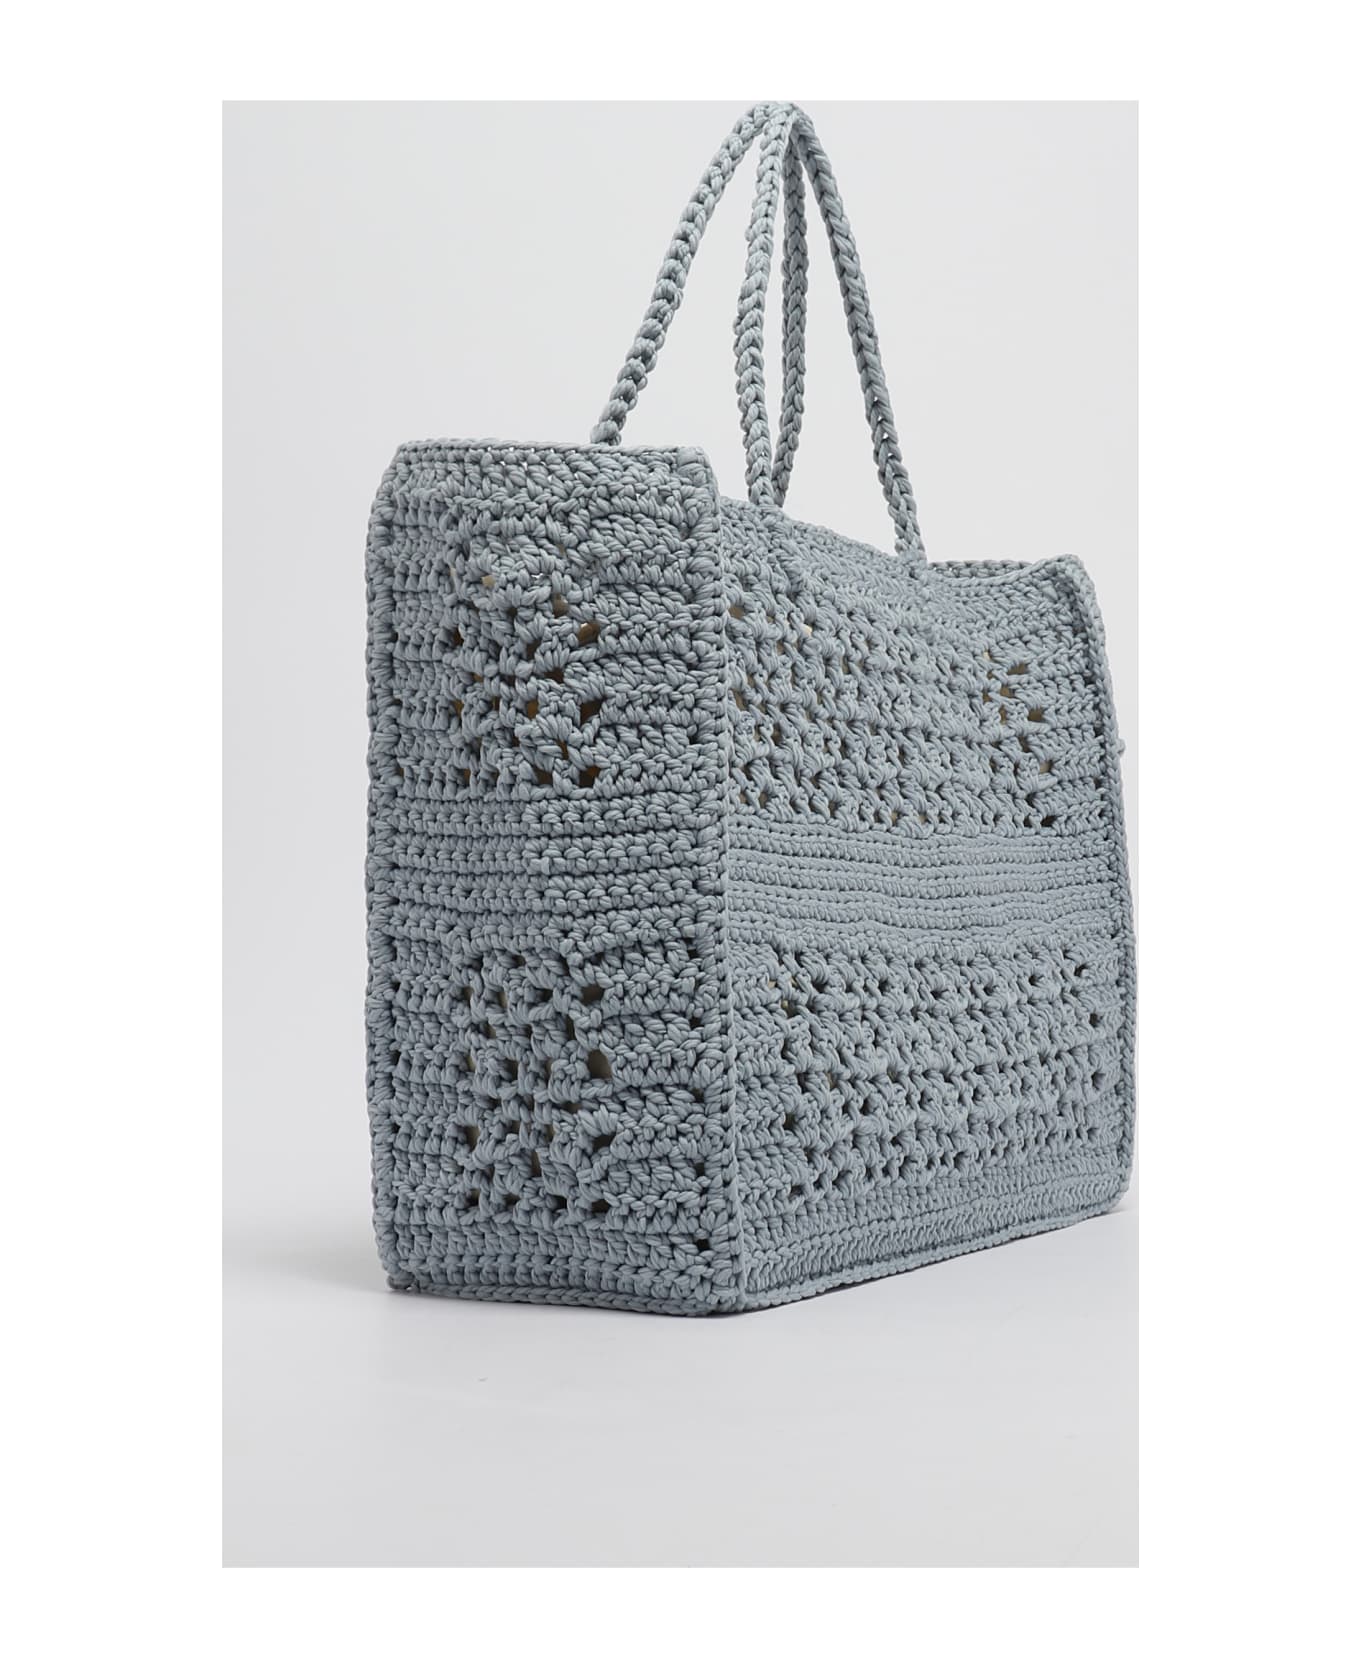 TwinSet Poliester Tote - CIELO